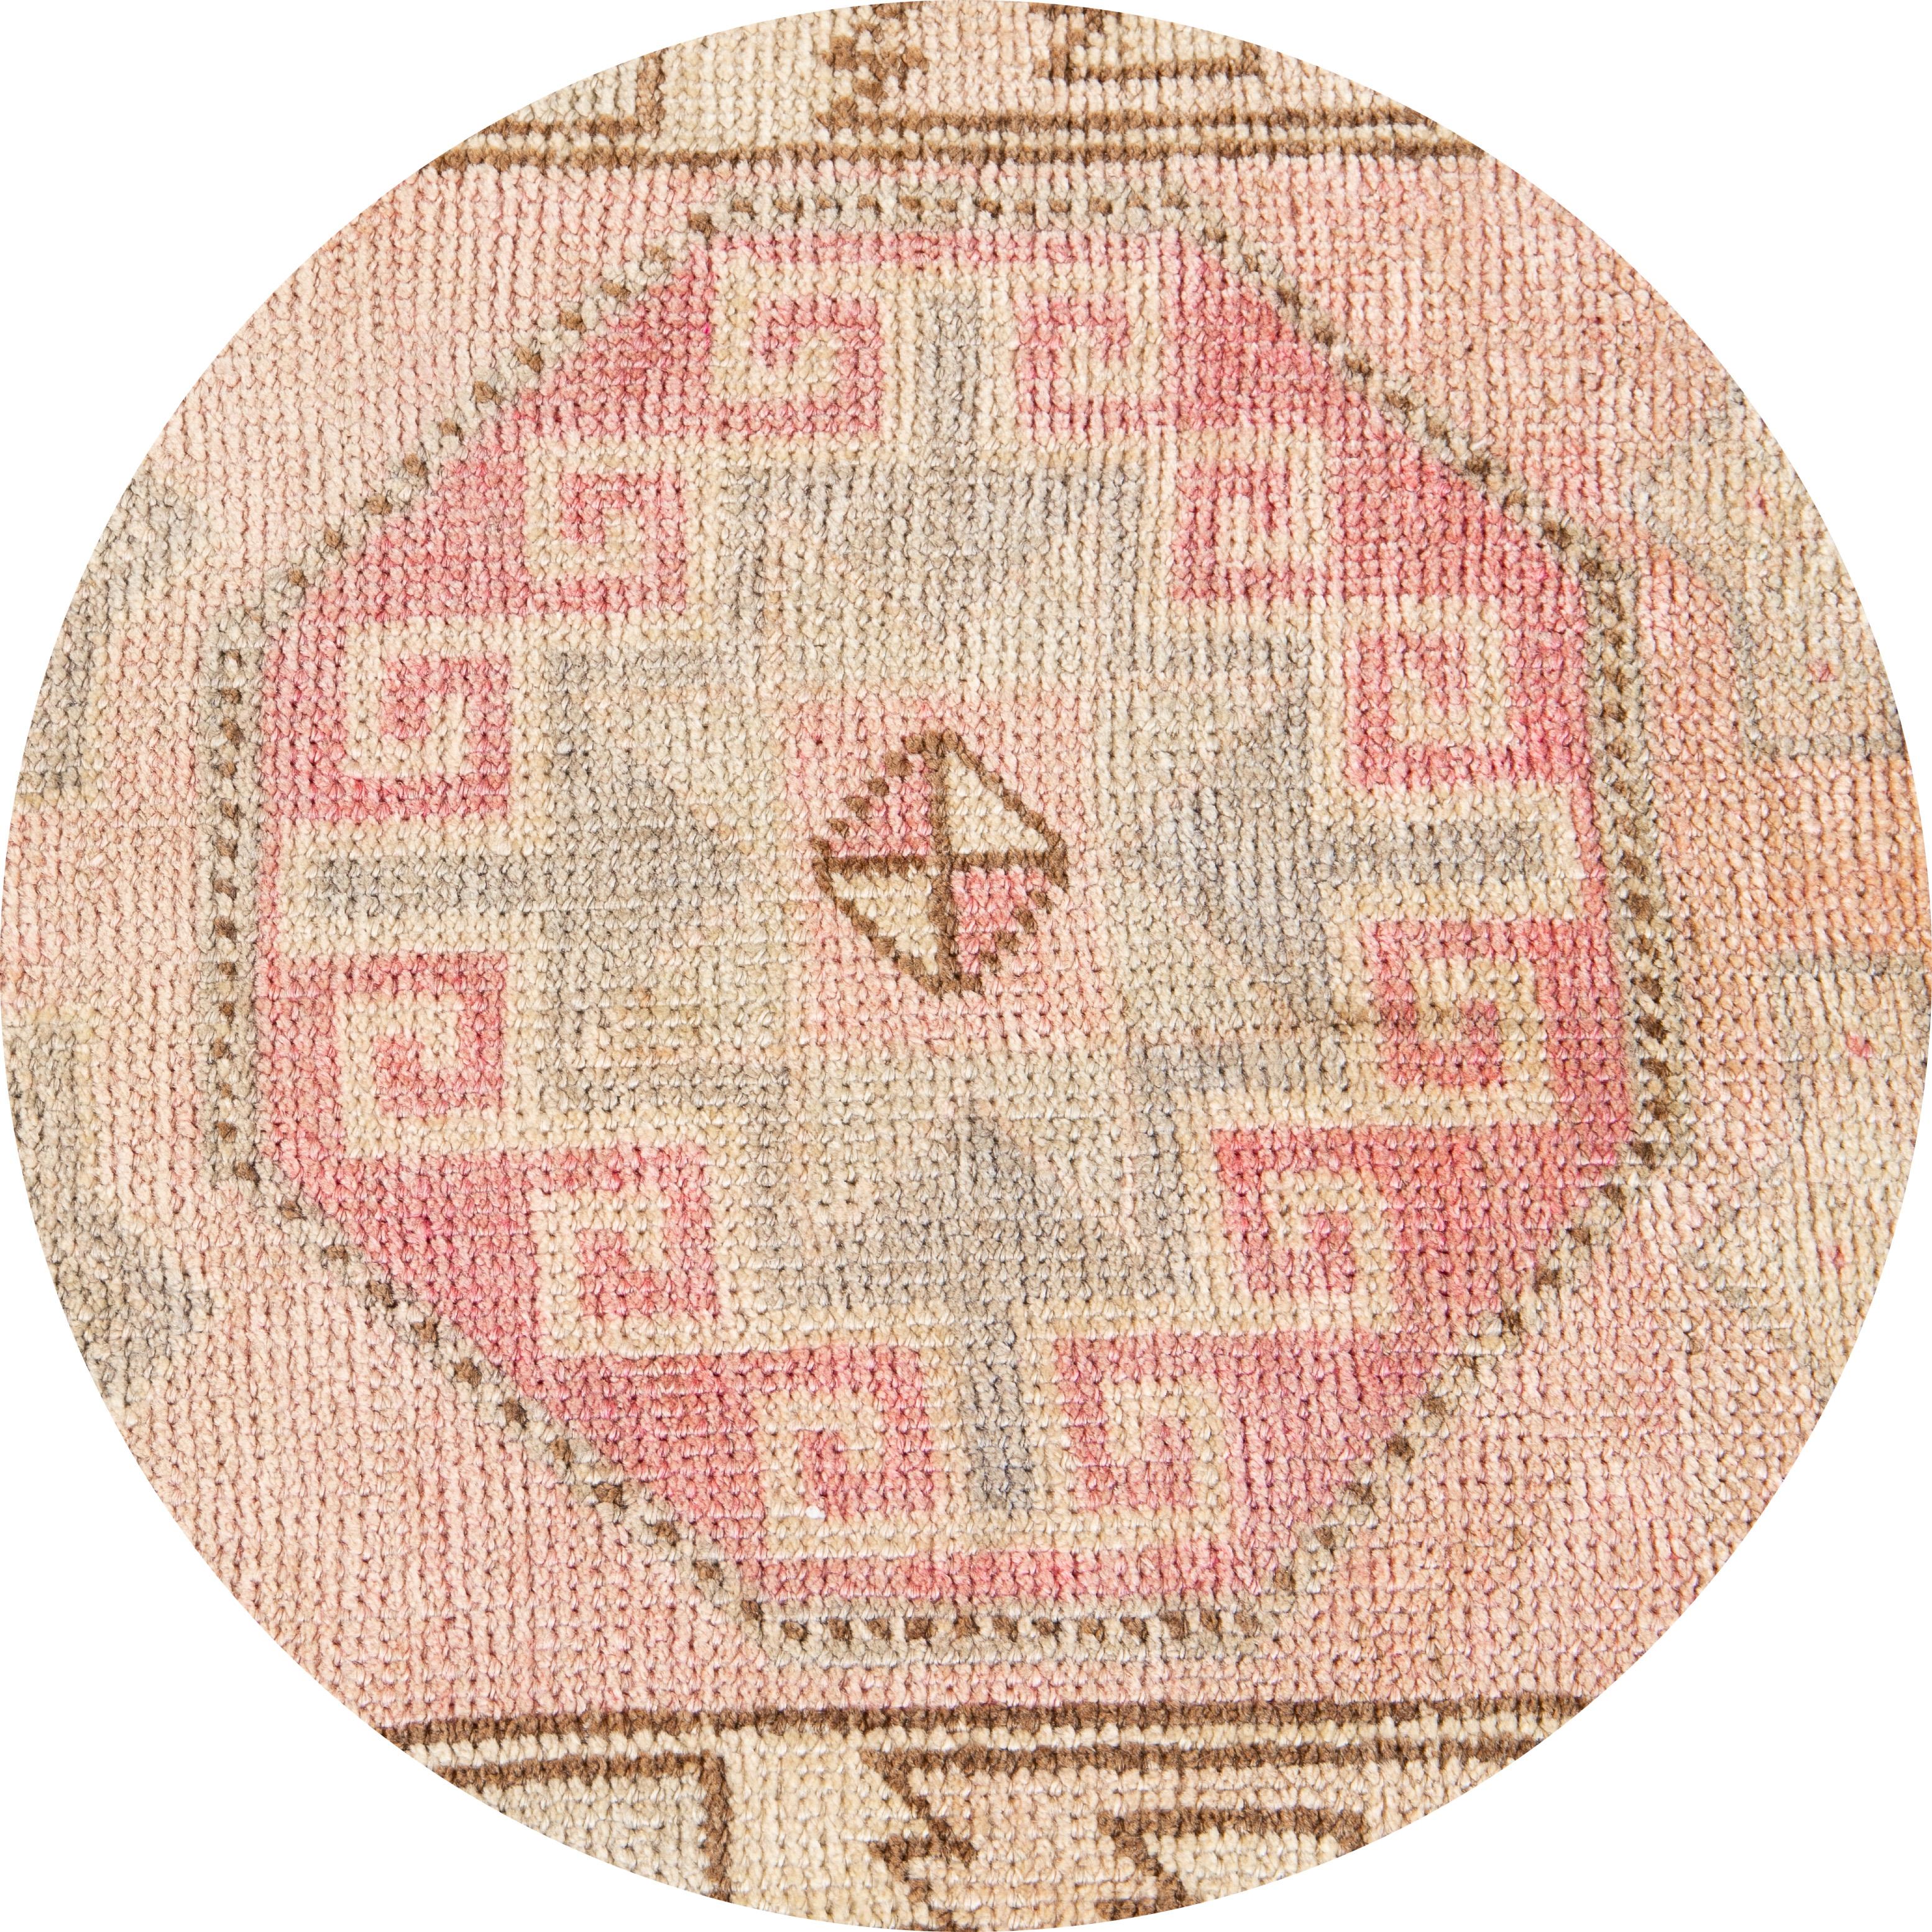 Beautiful vintage runner rug, hand knotted wool with a blush field, pink and gray accents in multi medallion design.
This rug measures 2' 8